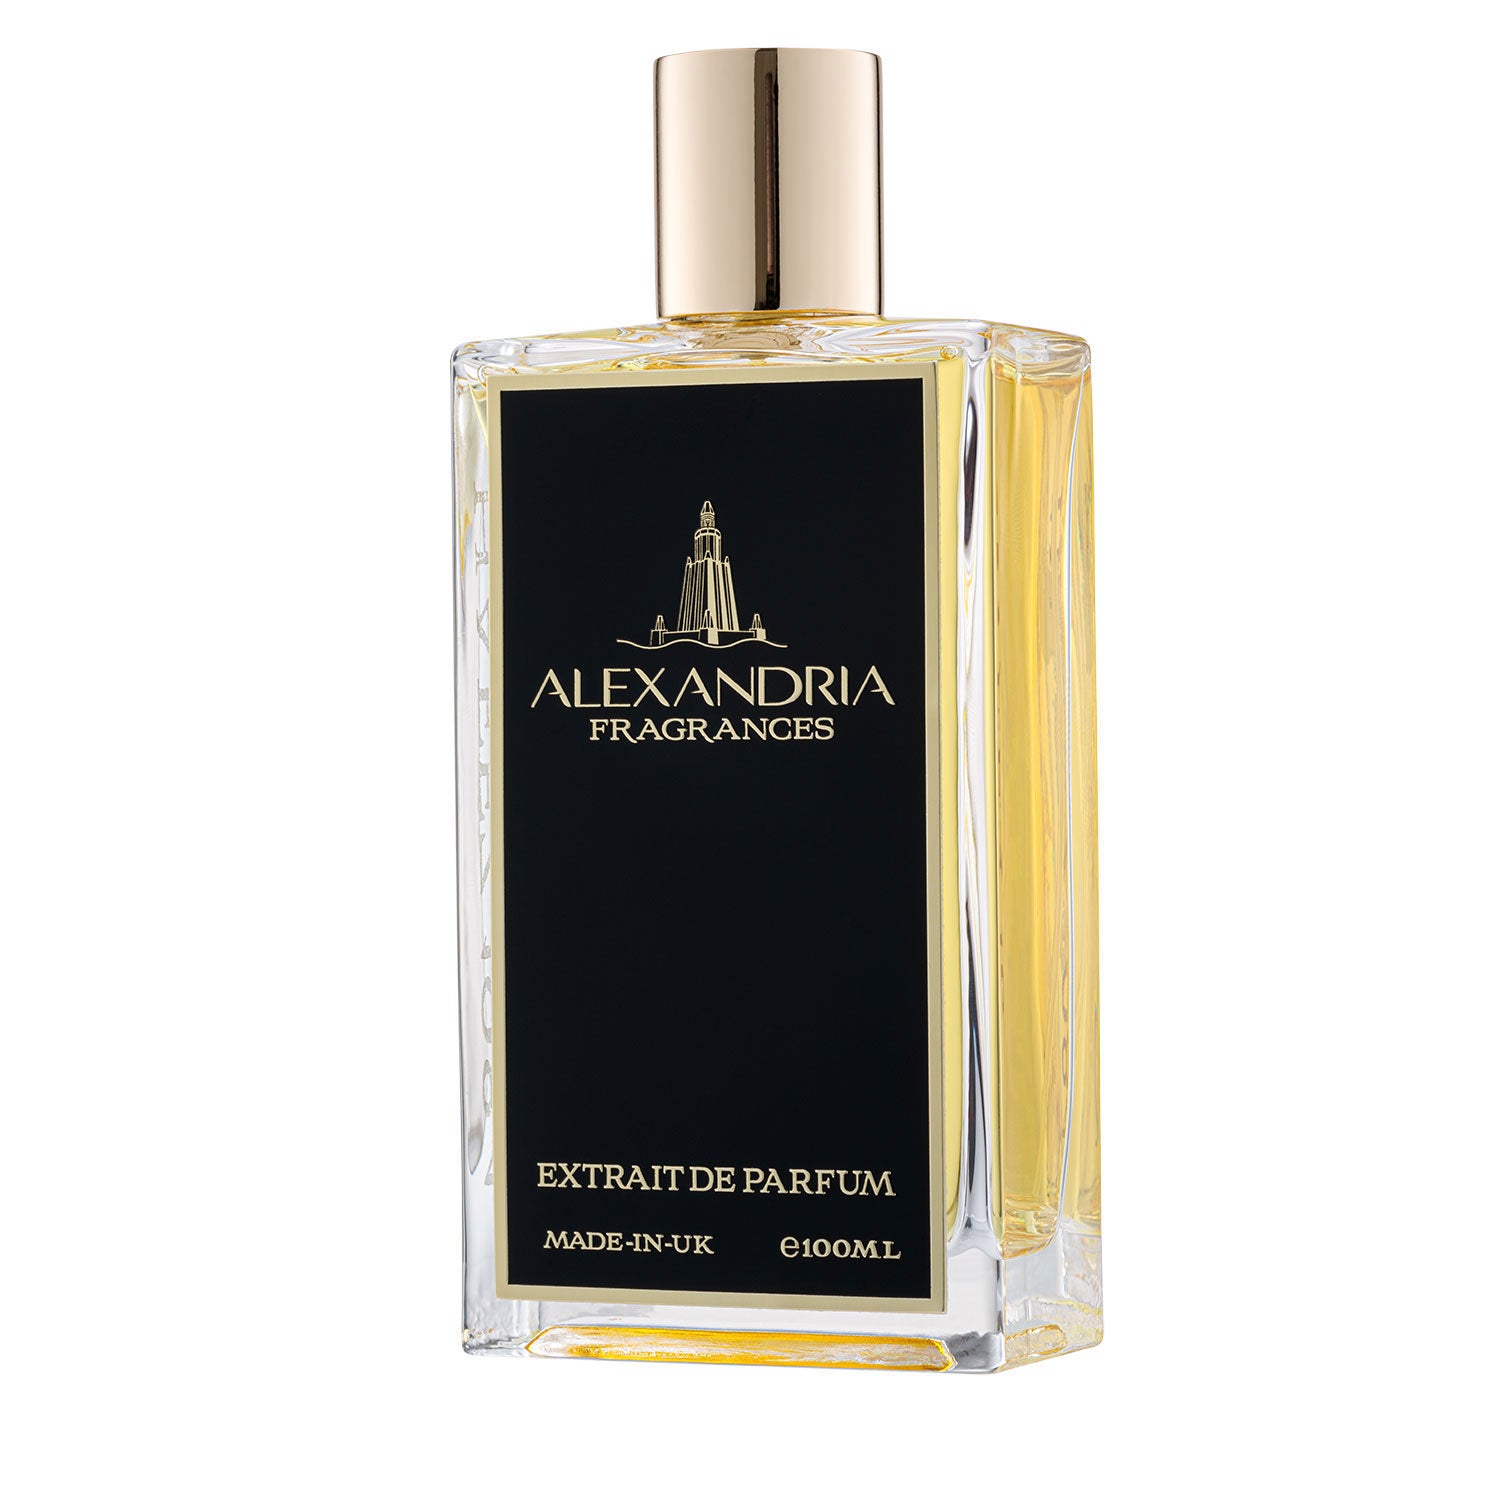 Lady Diana Exclusive Inspired By Parfums De Marly Delina Exlusif